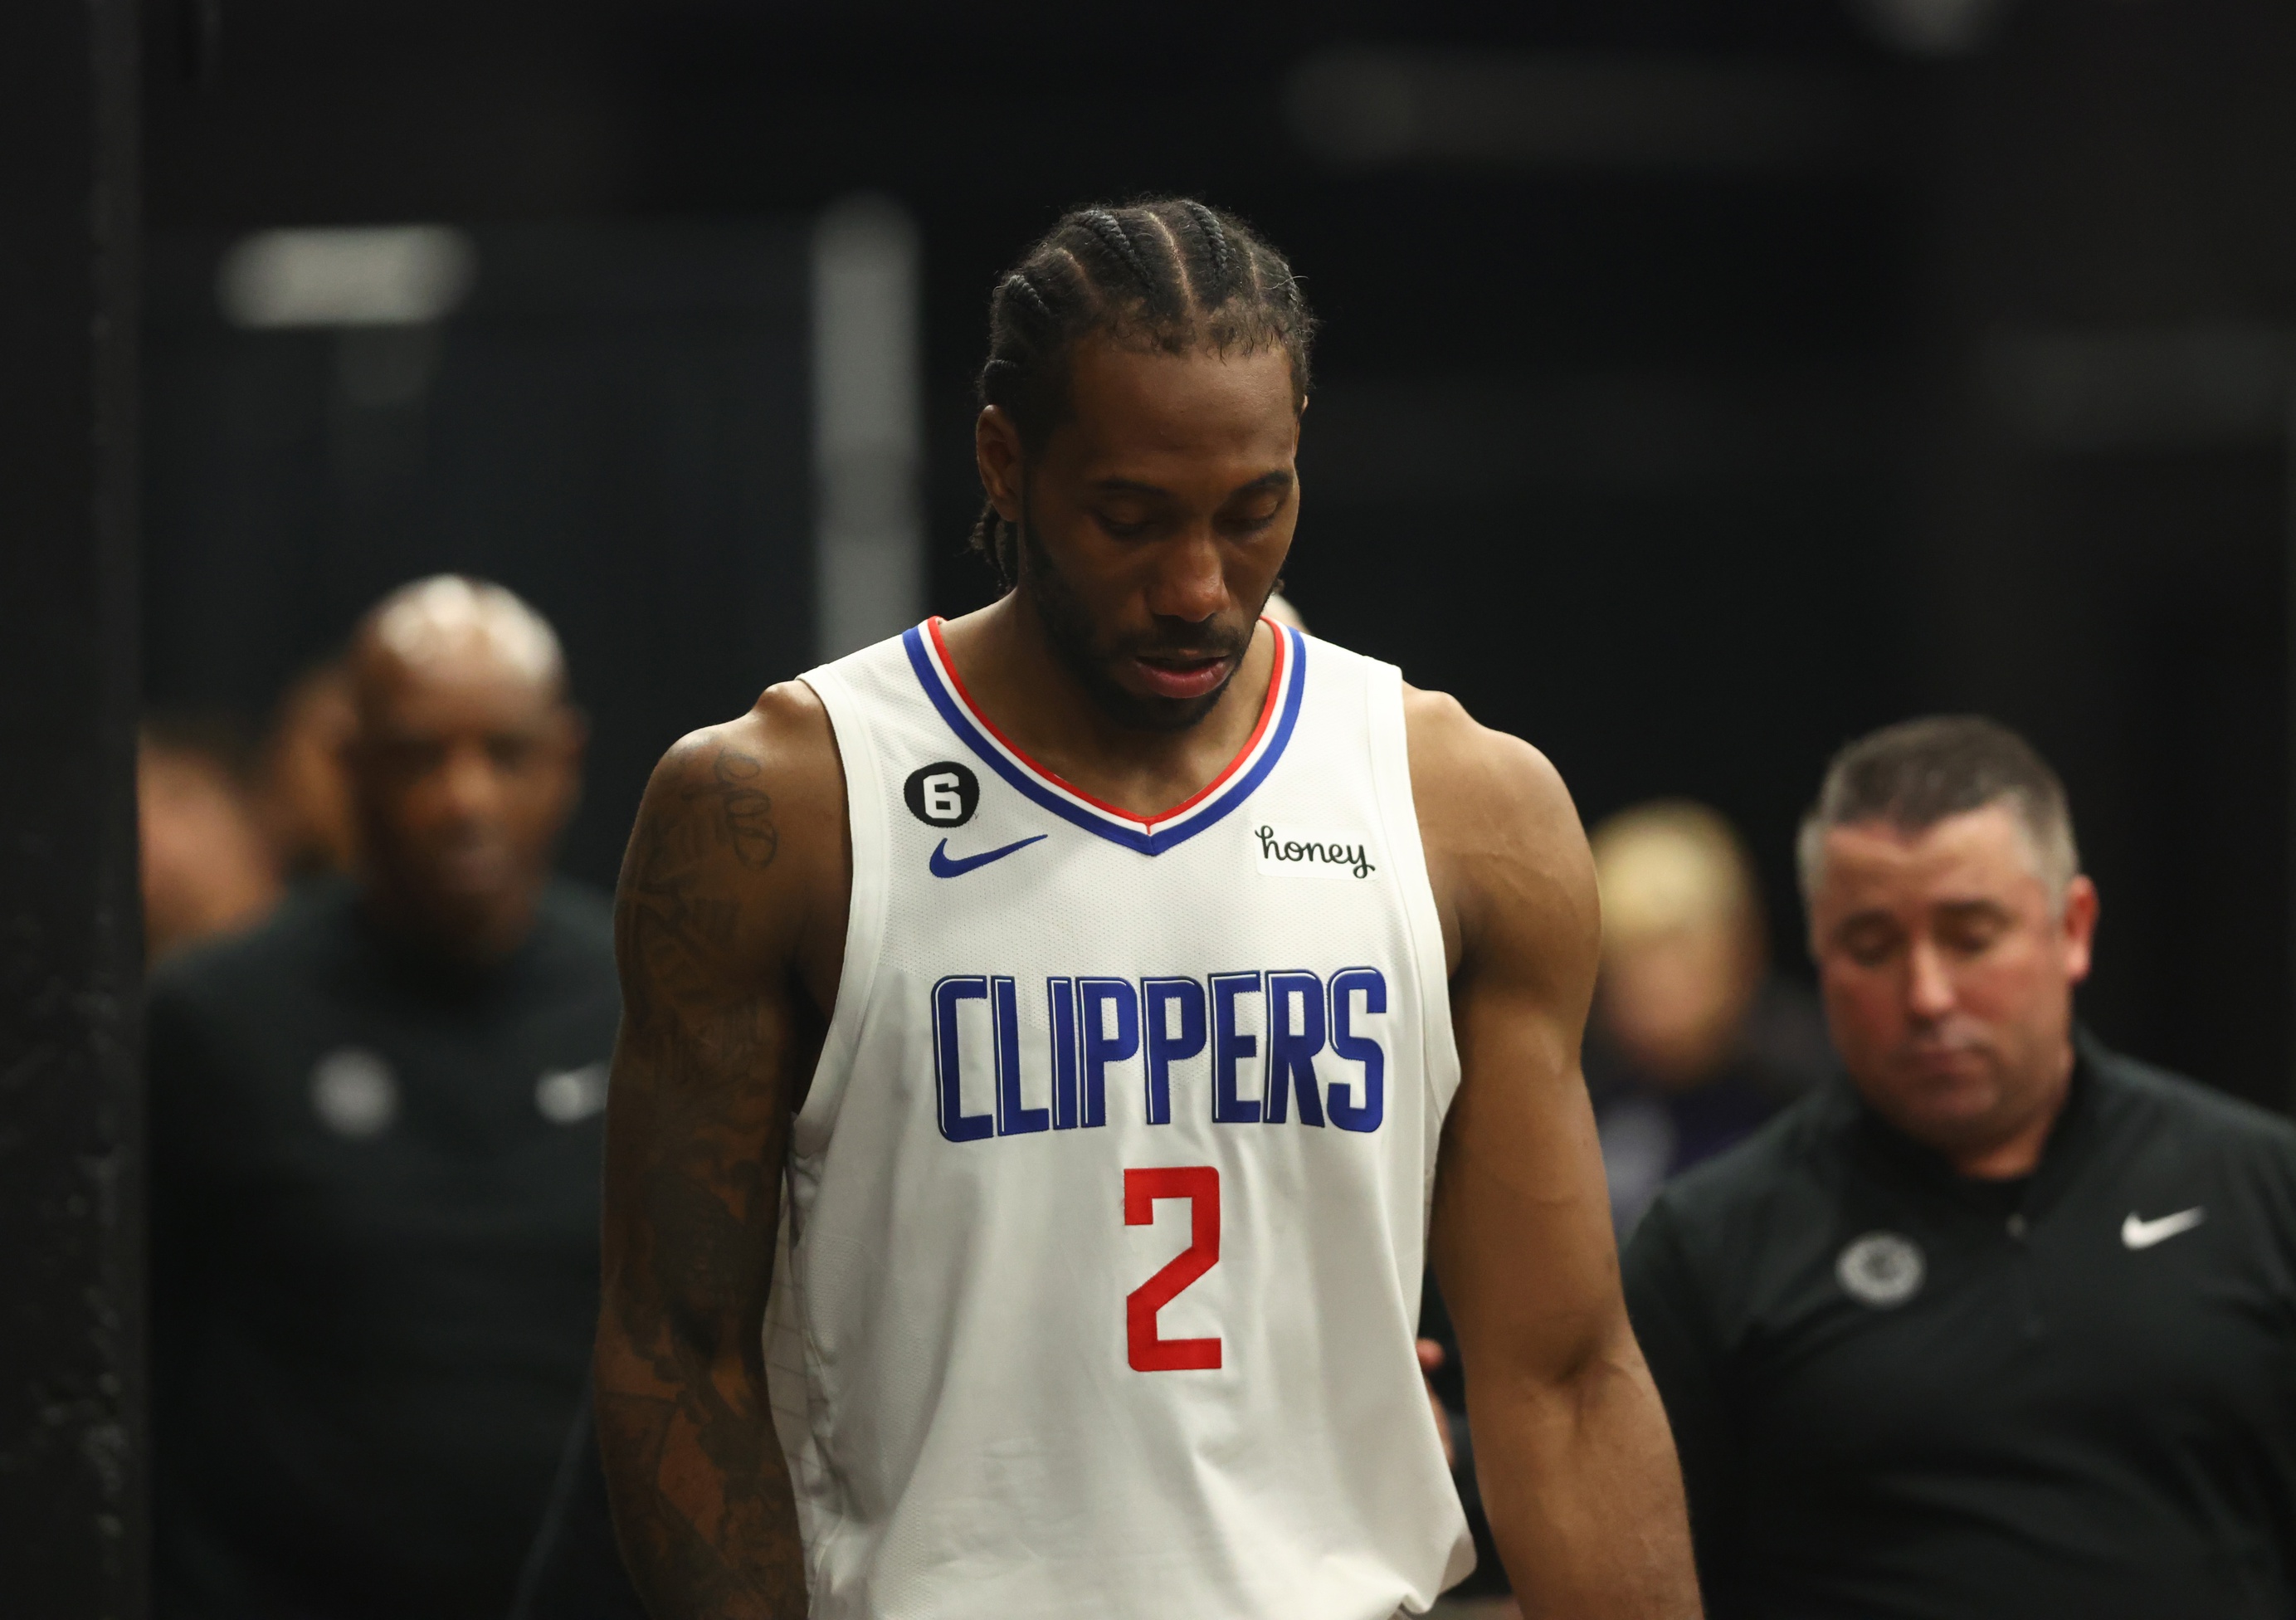 Lakers vs Clippers Prediction, Odds, Best Bets & Team Props - NBA